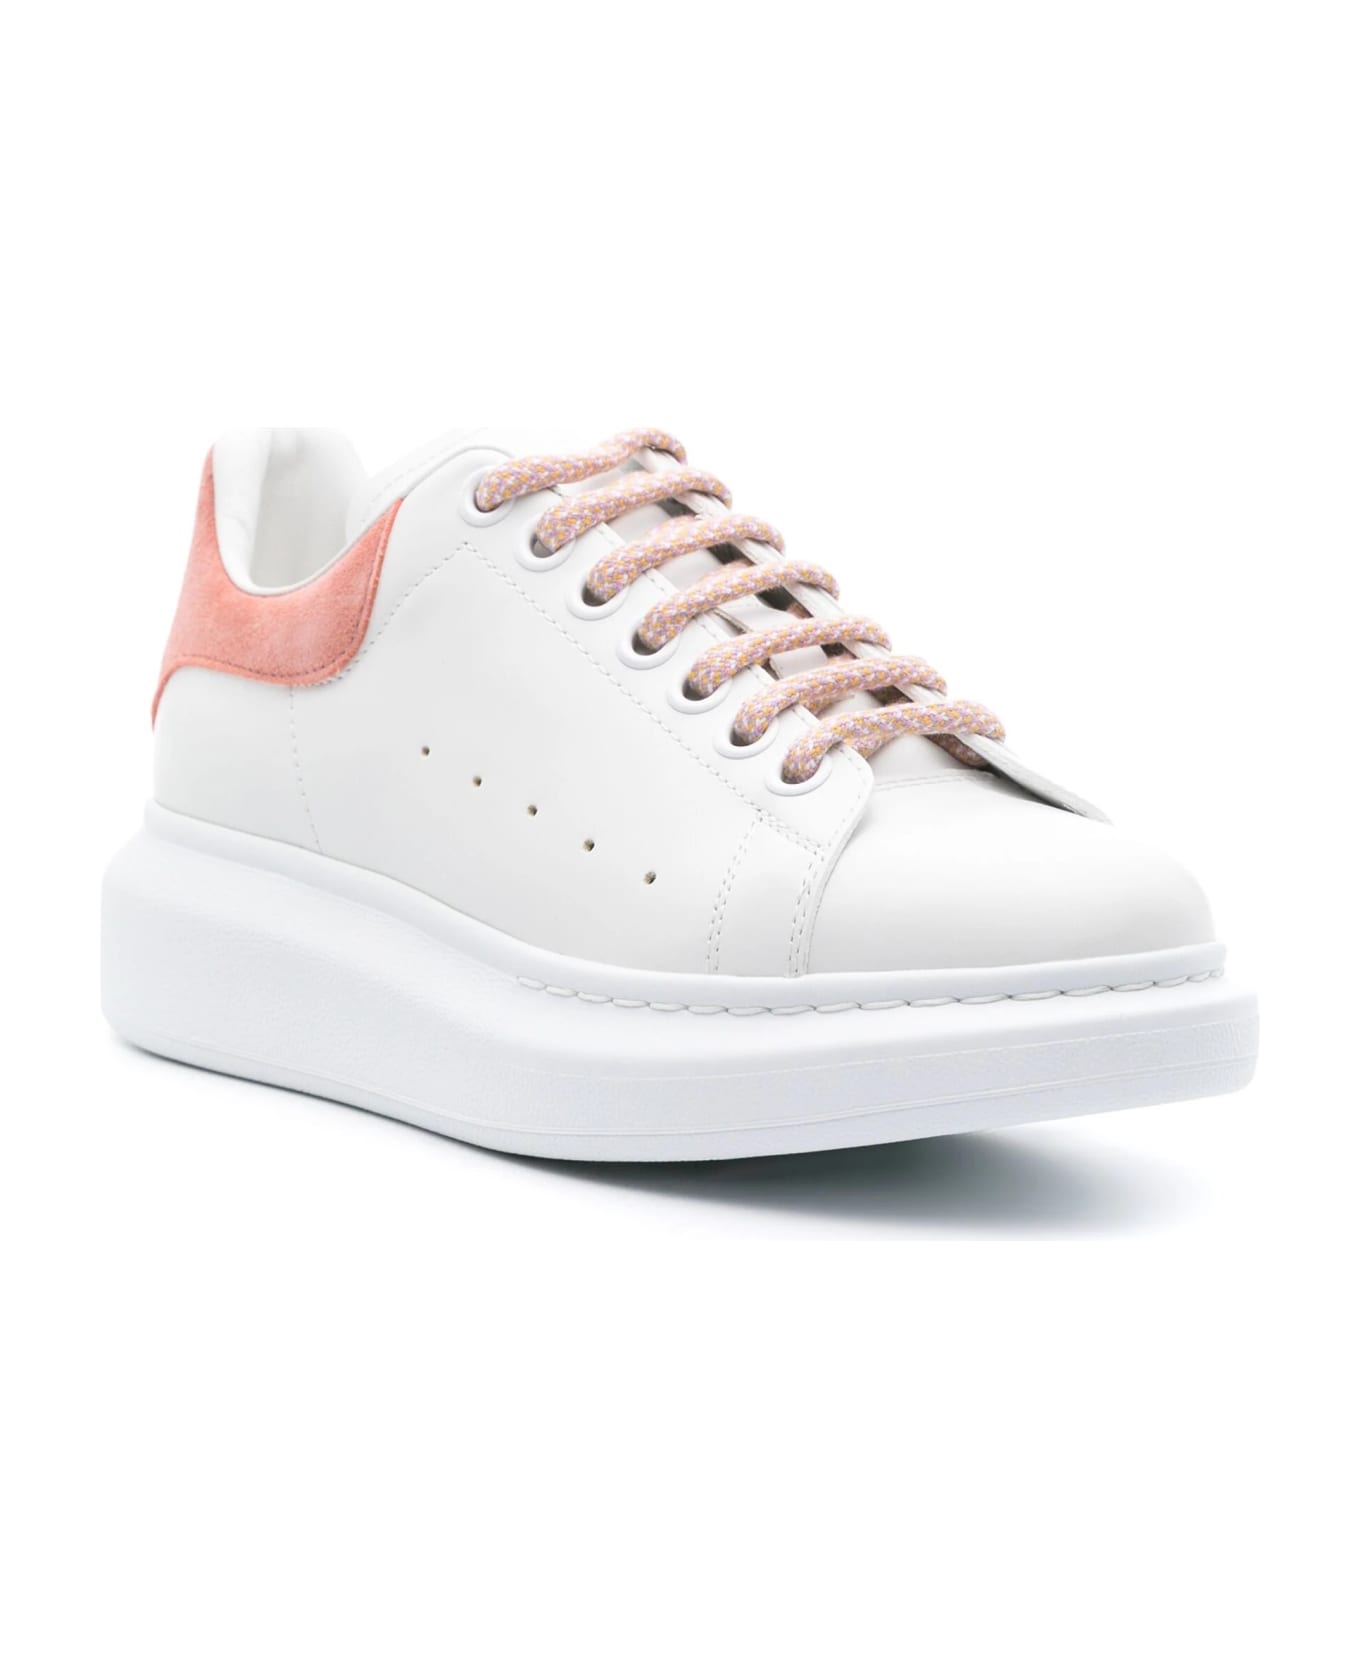 Alexander McQueen White Oversized Sneakers With Clay Suede Spoilers - White ウェッジシューズ